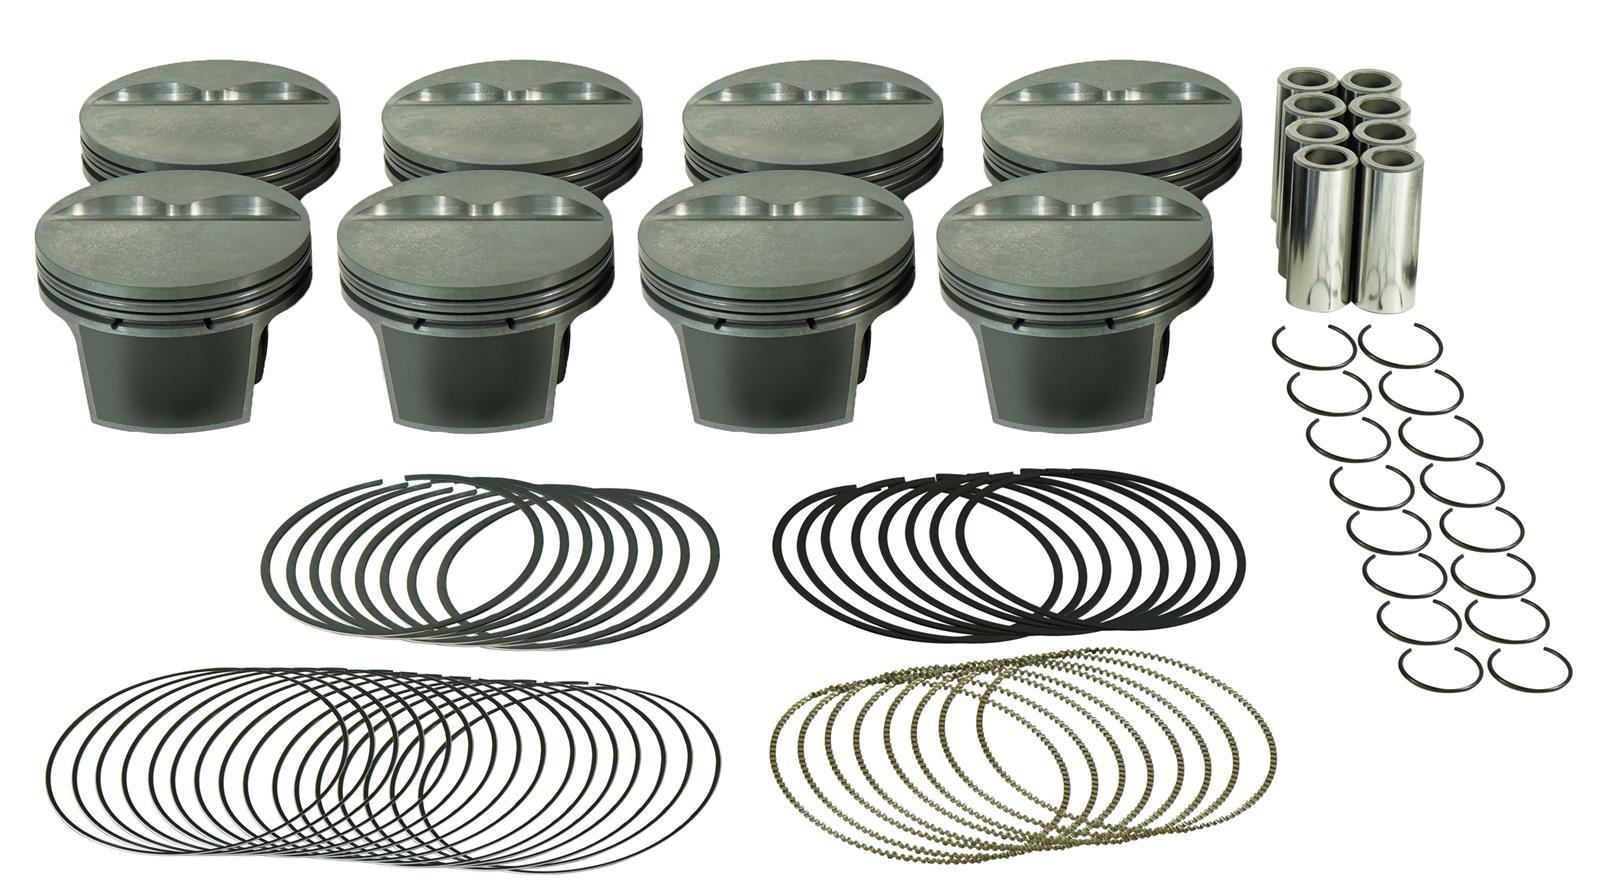 Mahle Pistons 197725130 Piston, Power Pak, 4.030 in Bore, 1.5 mm / 1.5 mm / 3.0 mm Ring Grooves, Minus 5.00 cc, Small Block Chevy, Kit